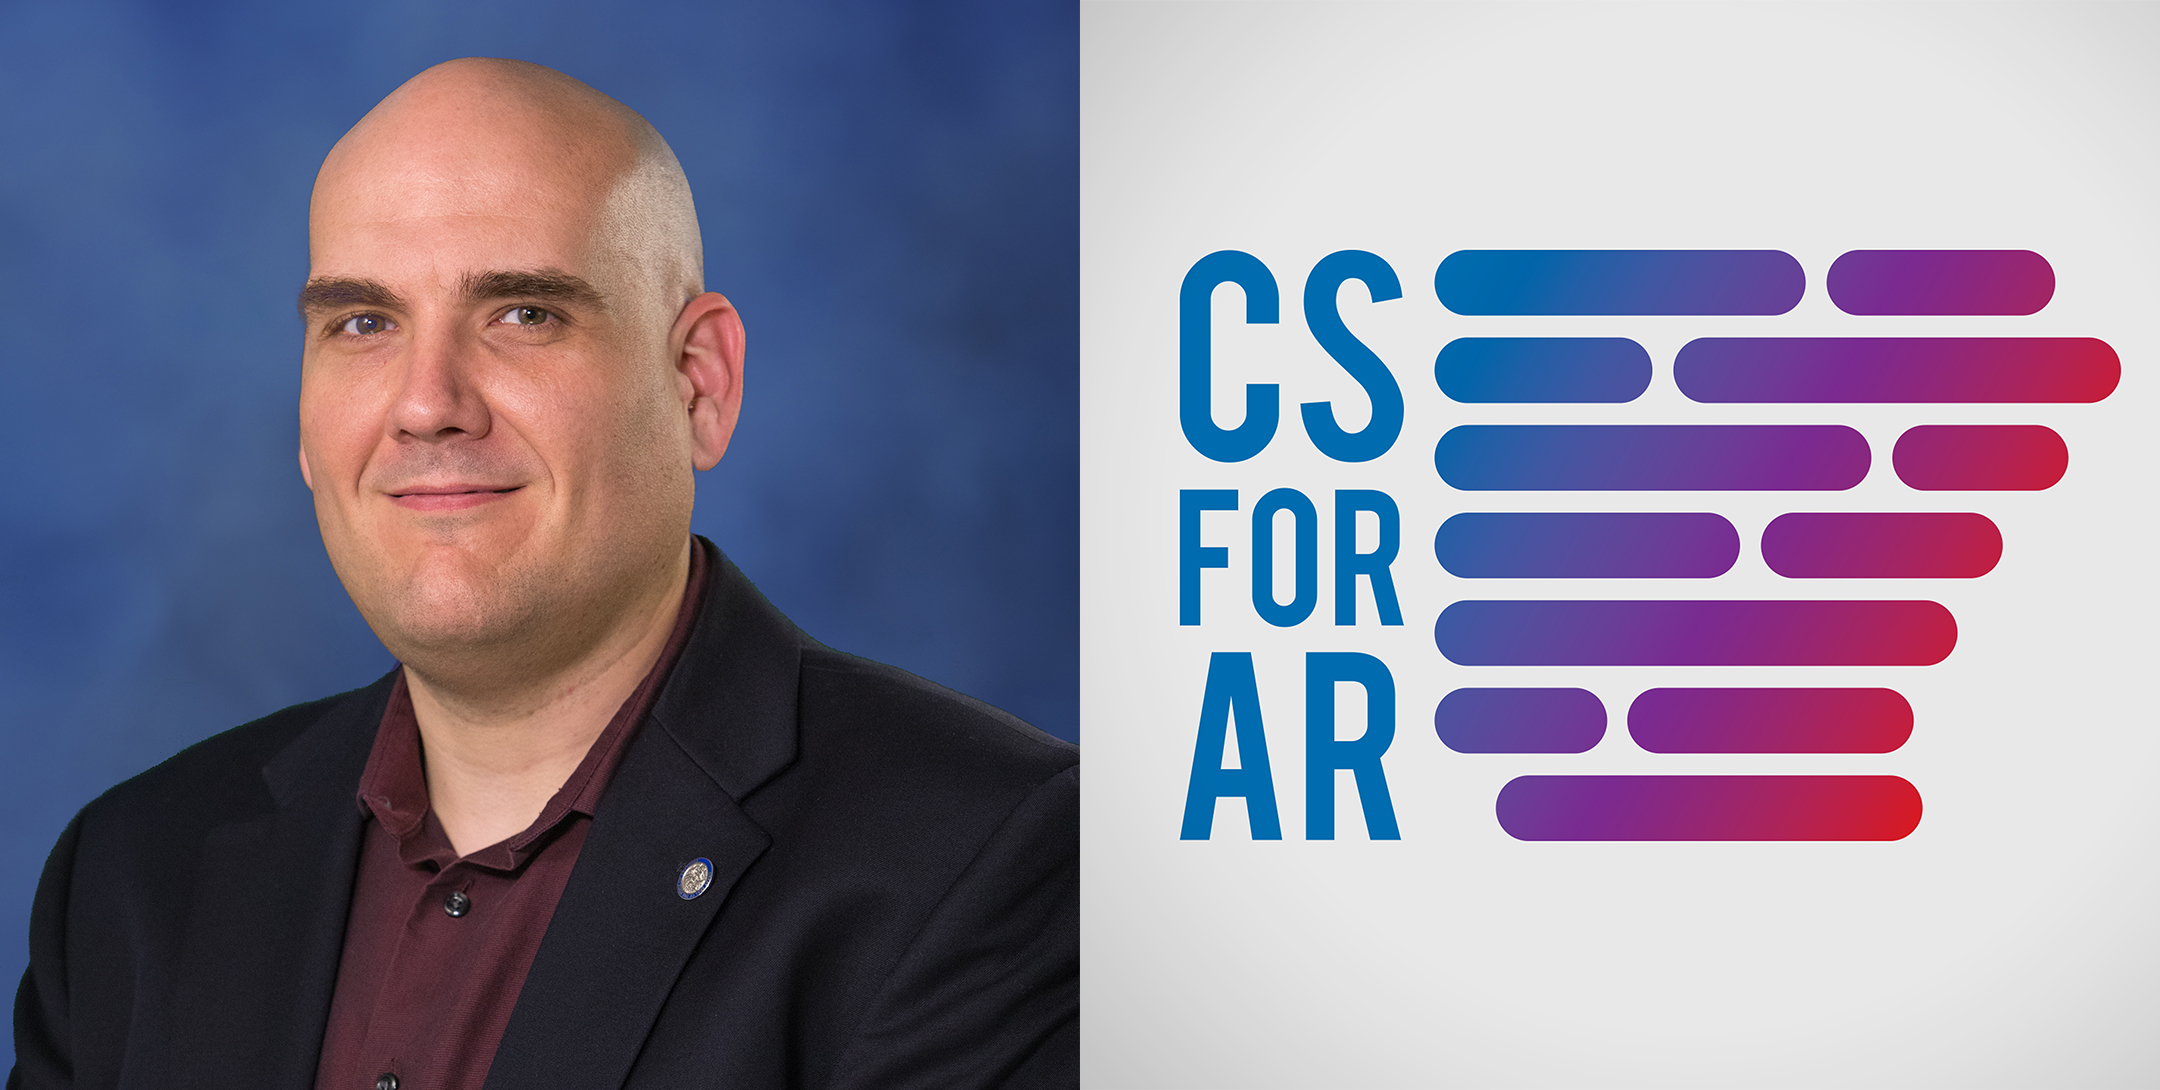 Headshot photo of Anthony Owen on the left, logo for CS for AR on the right